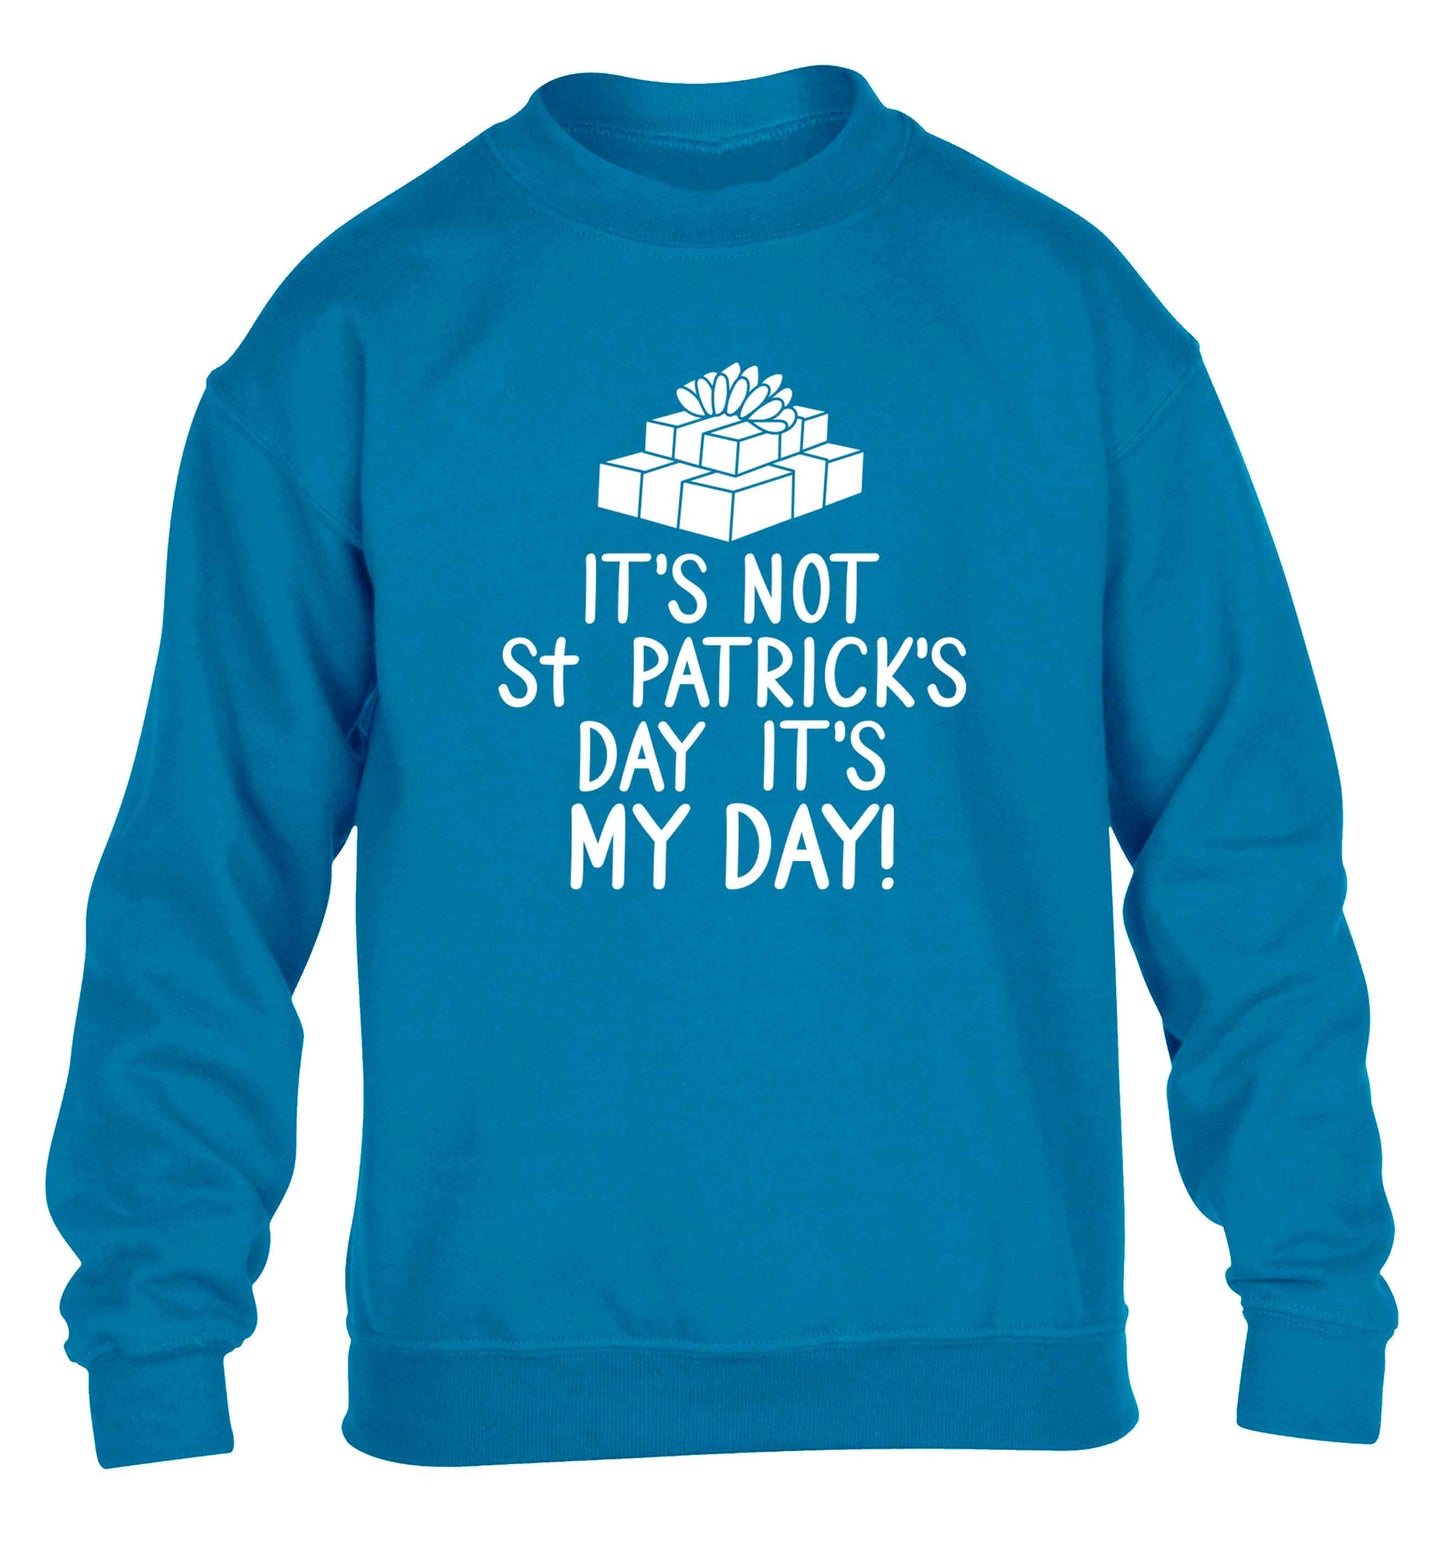 Funny gifts for your mum on mother's dayor her birthday! It's not St Patricks day it's my day children's blue sweater 12-13 Years